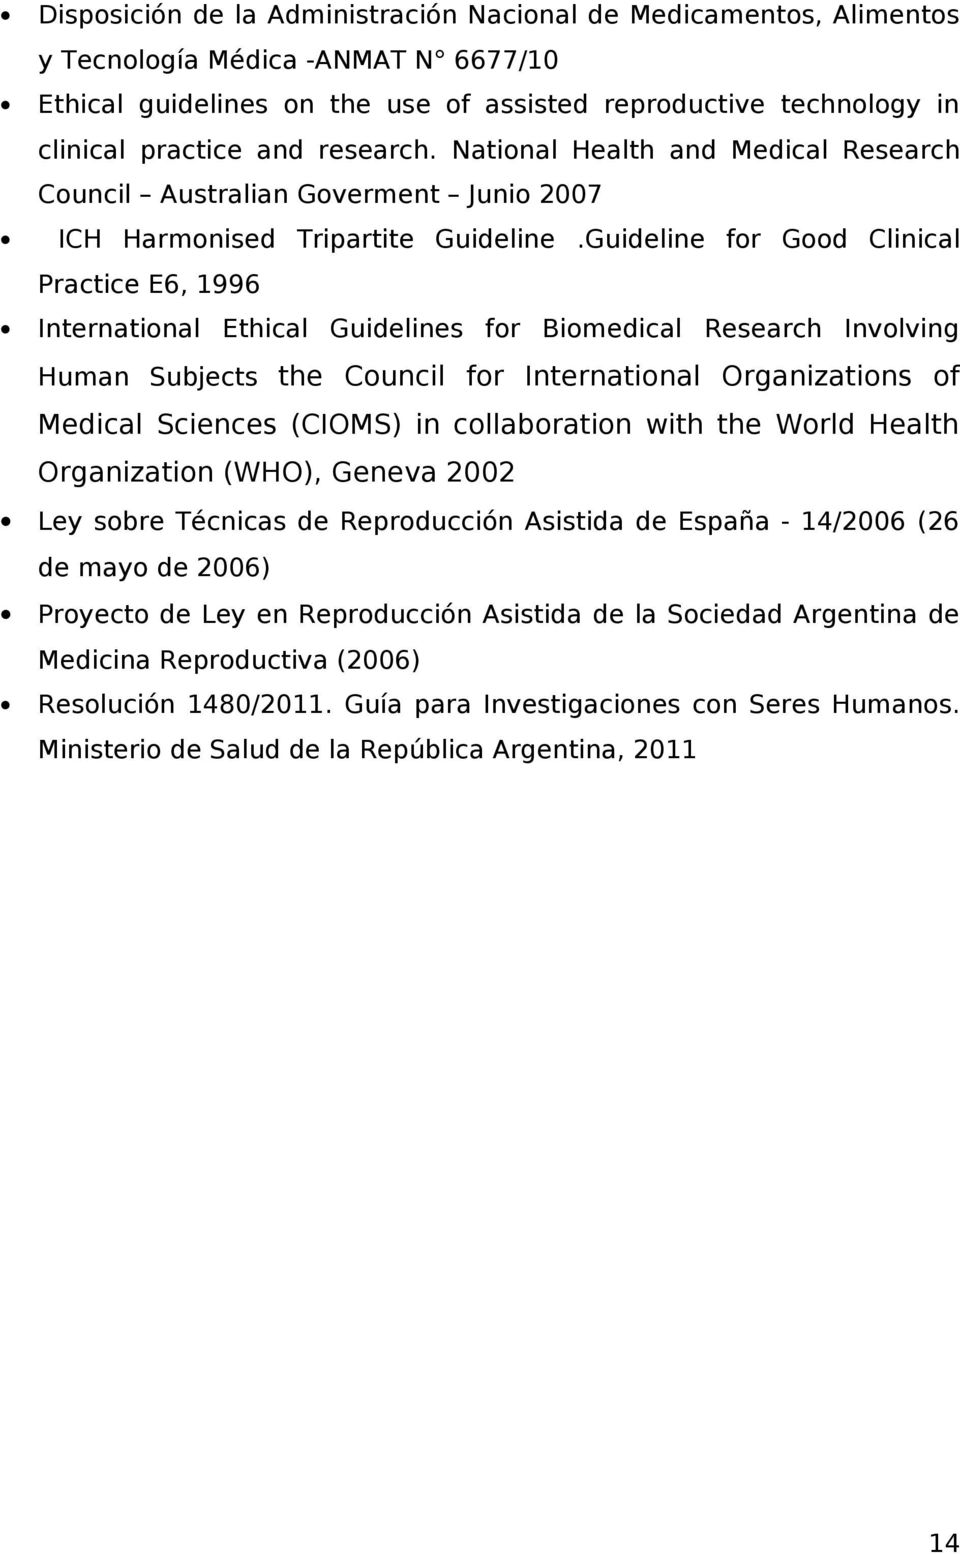 Guideline for Good Clinical Practice E6, 1996 International Ethical Guidelines for Biomedical Research Involving Human Subjects the Council for International Organizations of Medical Sciences (CIOMS)